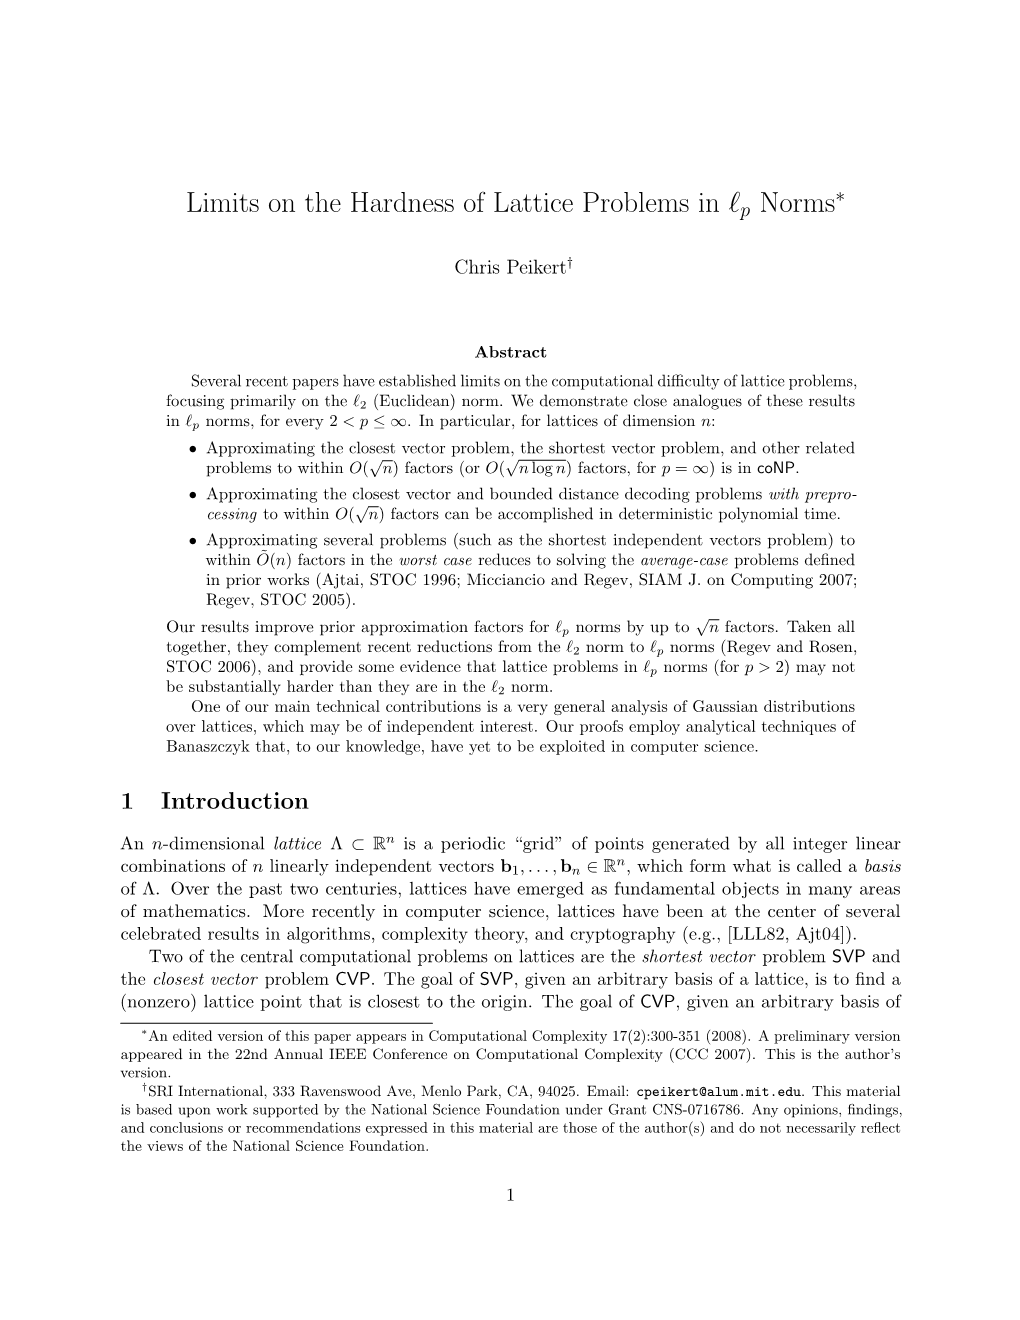 Limits on the Hardness of Lattice Problems in Lp Norms